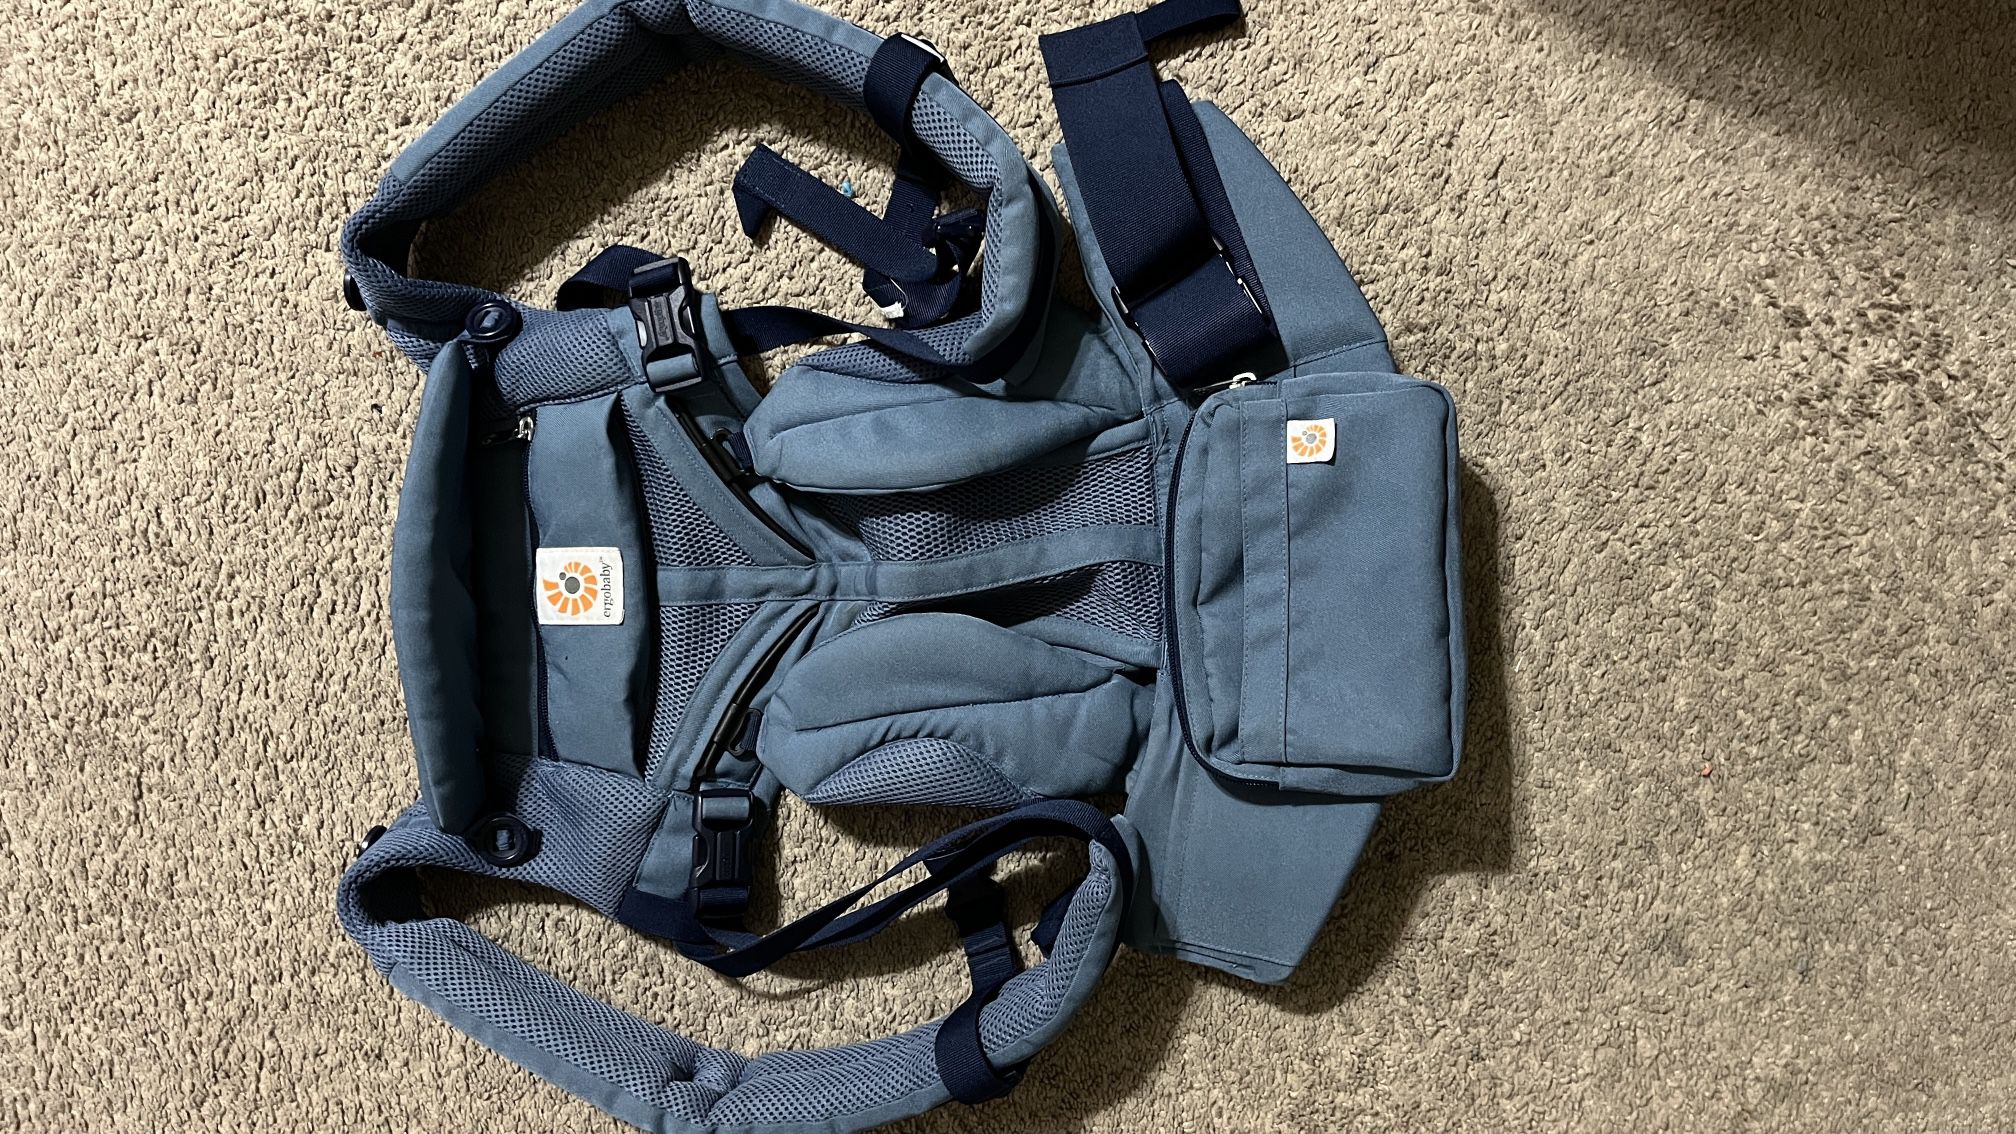 Ergobaby Omni 360 All-Position Baby Carrier With Lumbar Support And Cool Air Mesh